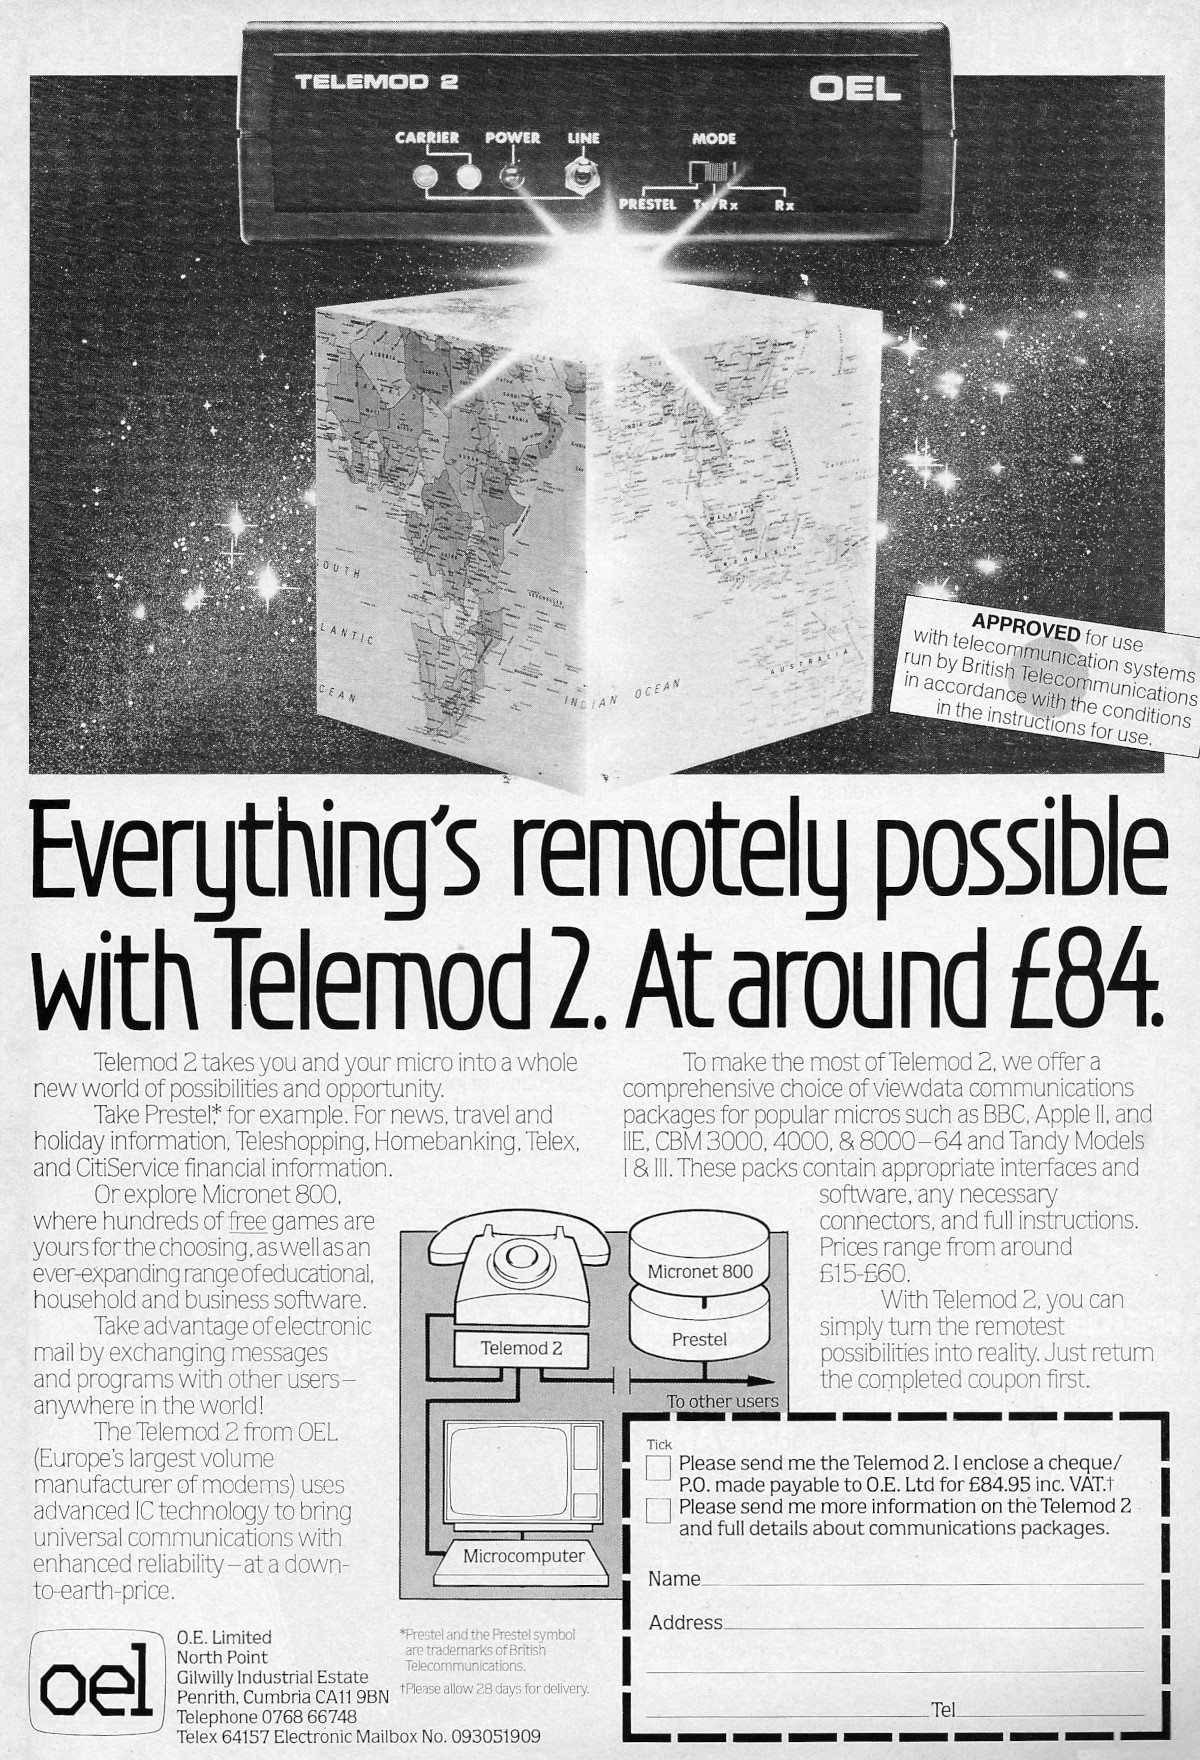 The Telemod 2 modem f<span class='hilite'>rom</span> OEL of Penrith, Cumbria - quite a bargain at only £84, or about £310 in 2024. Software and interfaces were extra though, with prices f<span class='hilite'>rom</span> £15 - £60